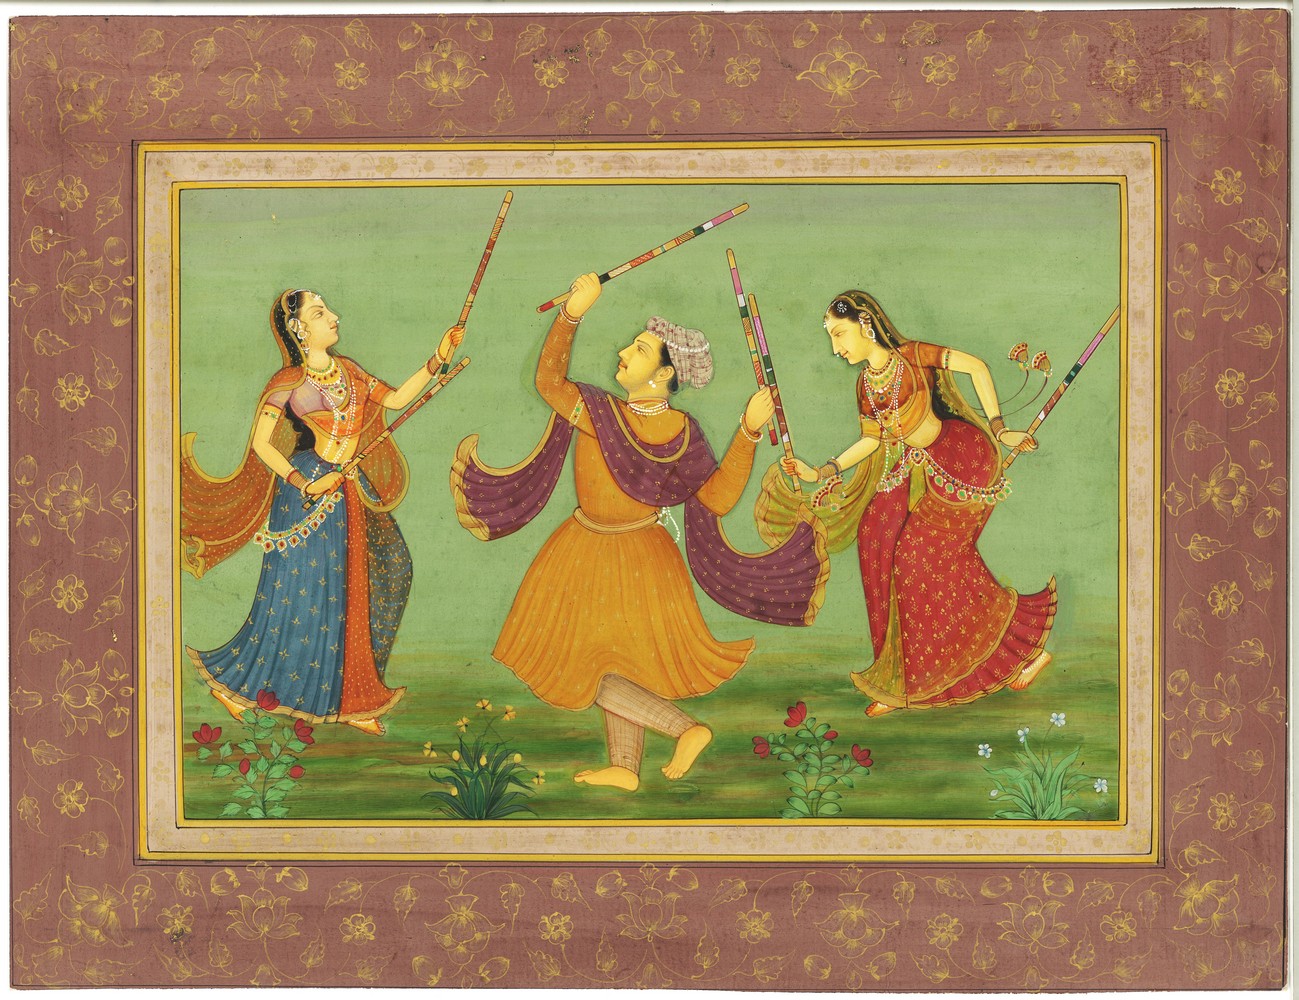 A GOOD 19TH / 20TH CENTURY INDO PERSIAN MUGHAL ART HAND PAINTED PICTURE ON PAPER, depicting a